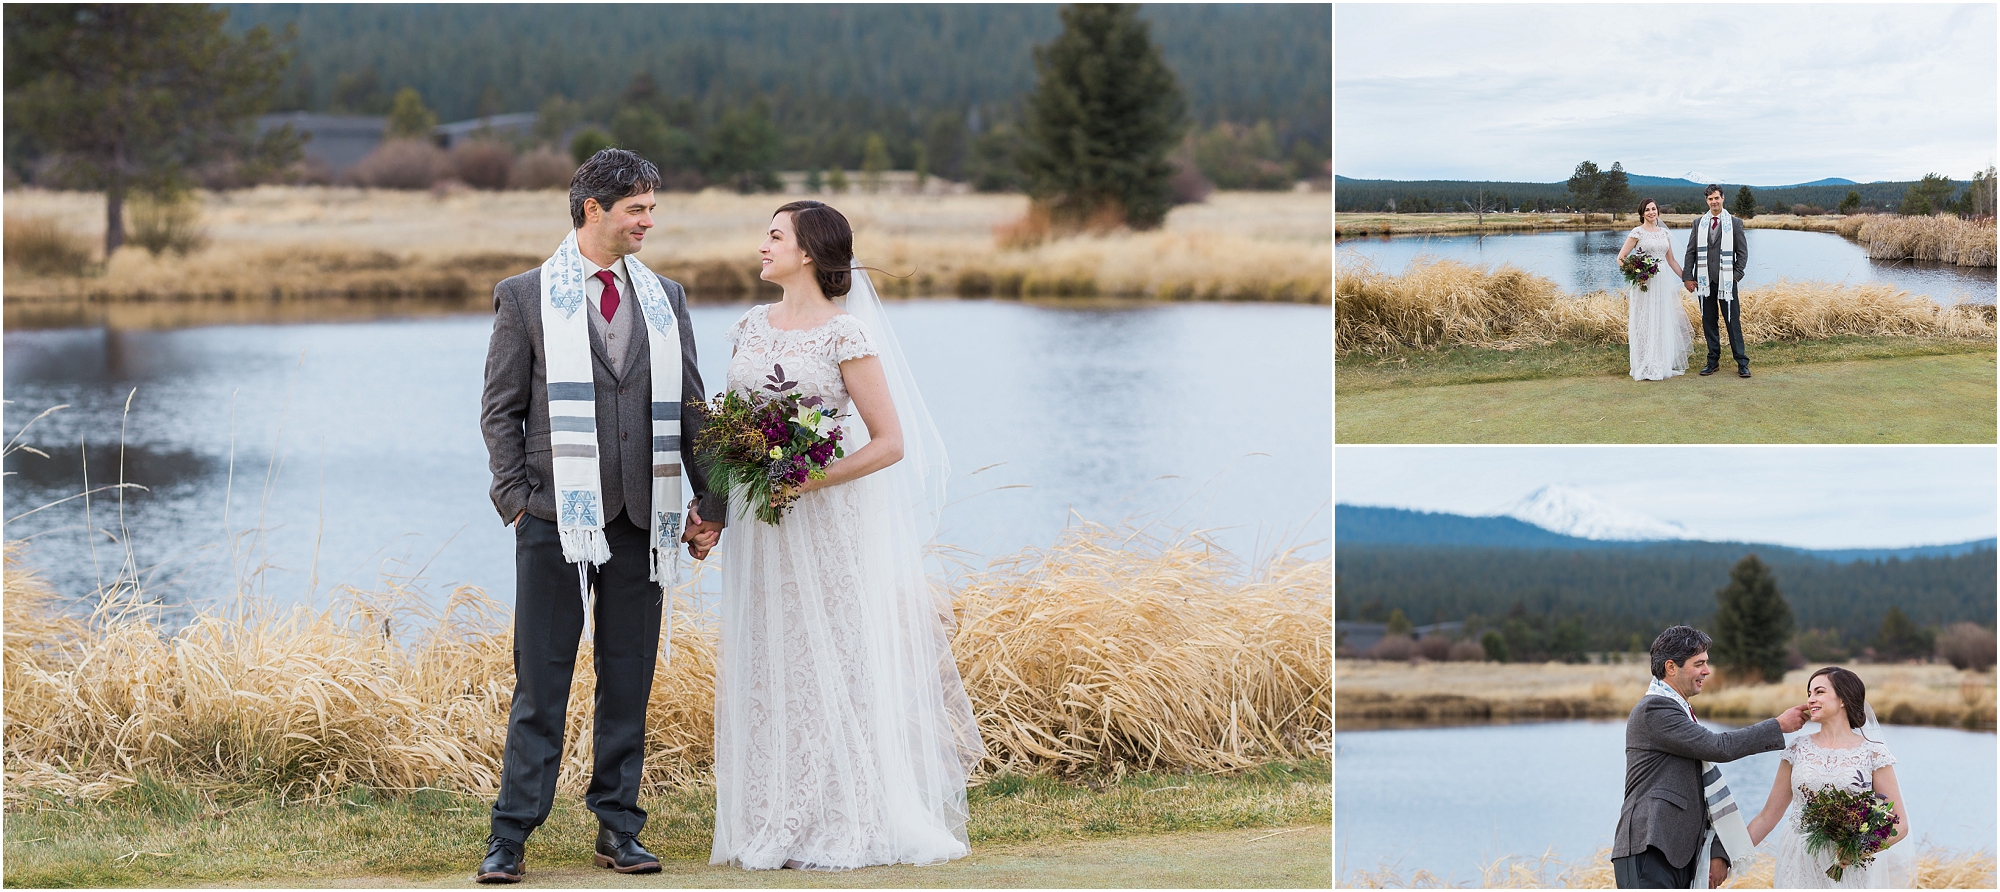 The groom wears a traditional Tallit, or prayer shawl, to honor some of his Jewish heritage at this Sunriver Resort winter wedding in Oregon. | Erica Swantek Photography